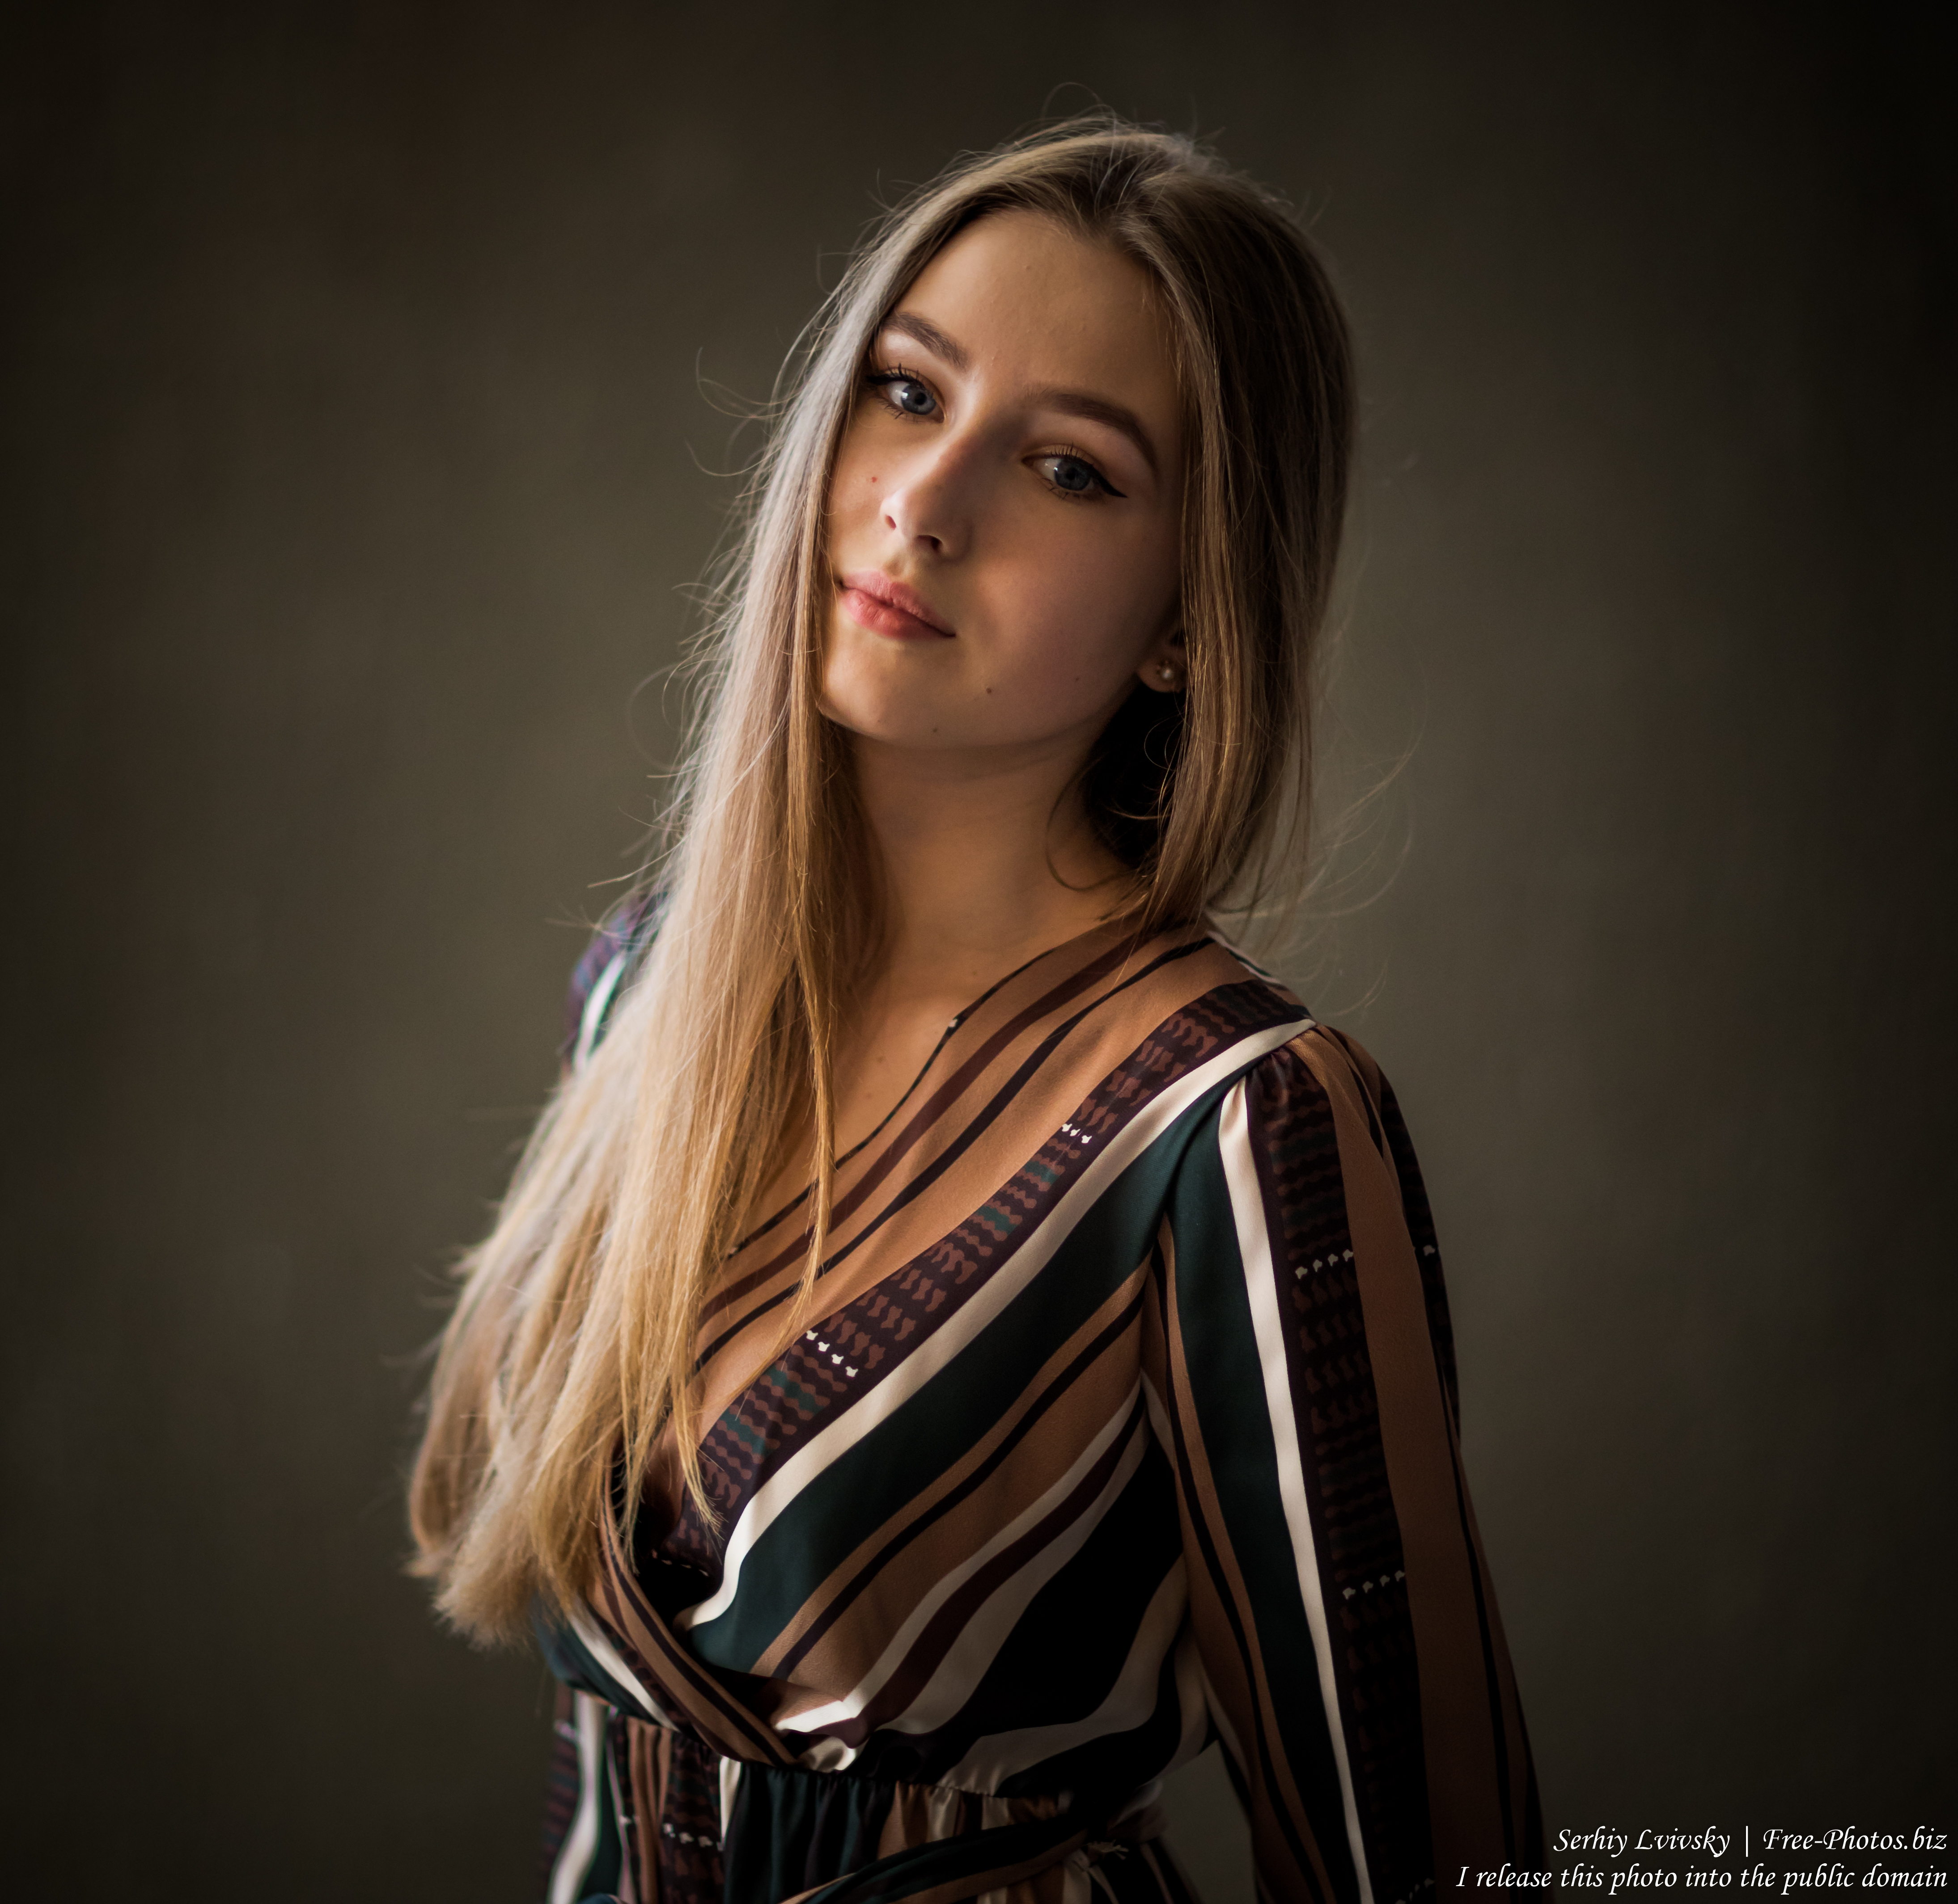 Vika - a 17-year-old girl with blue eyes and natural fair hair photographed in June 2019 by Serhiy Lvivsky, picture 21